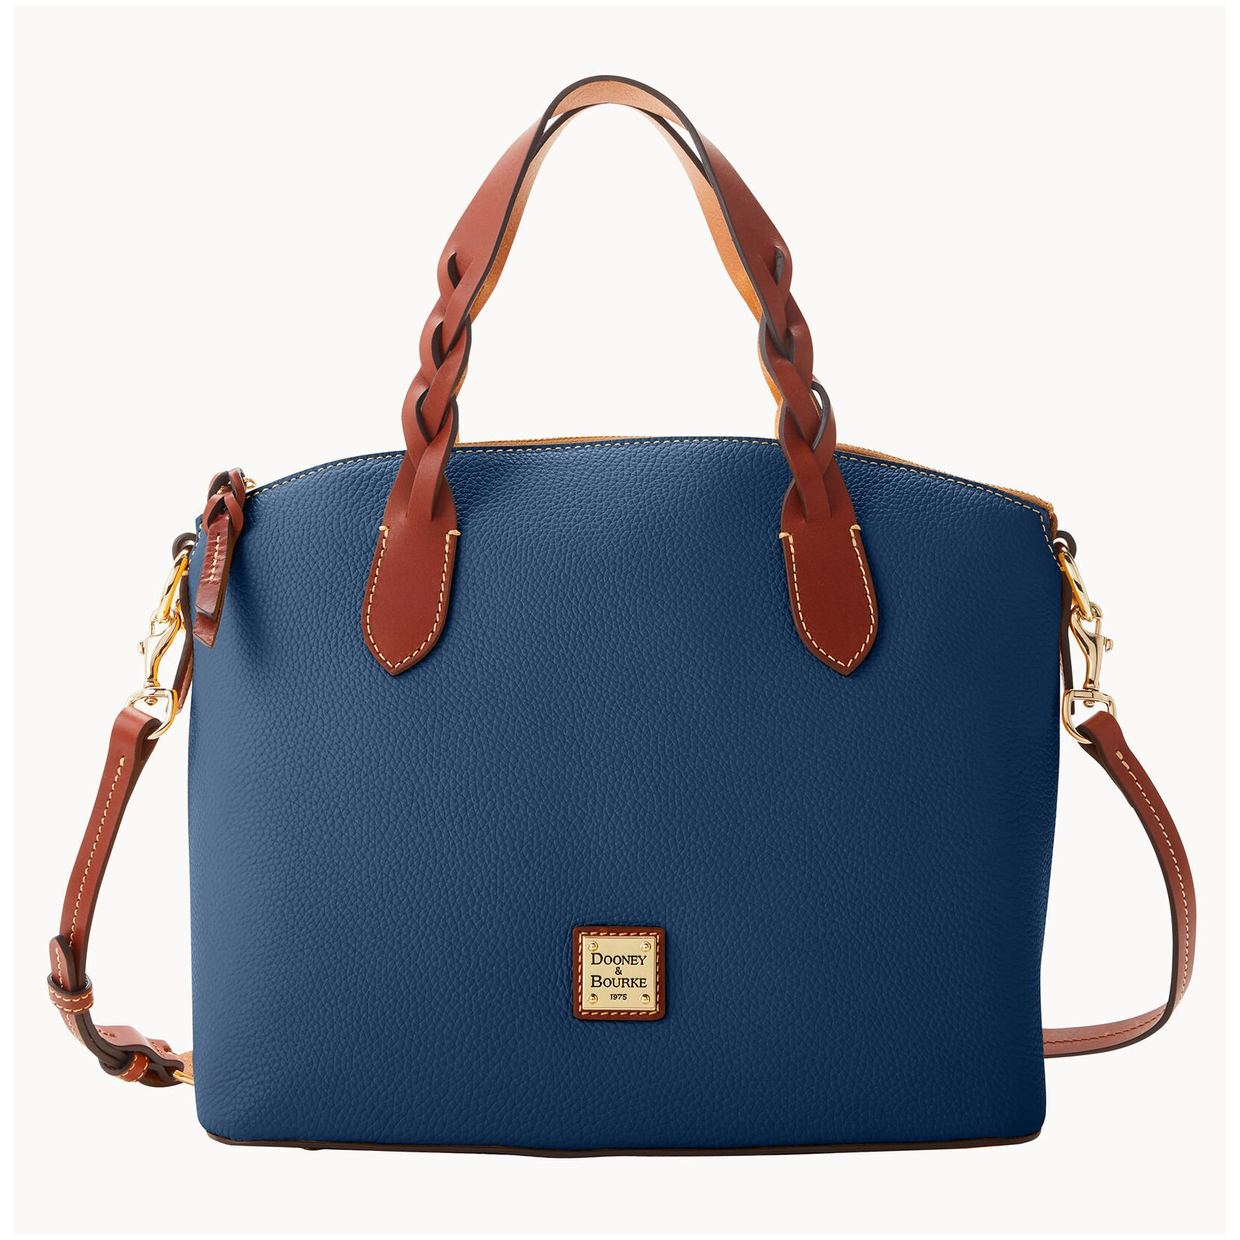 Blue handbag with brown handles and gold-tone hardware, featuring a detachable strap and a brand logo plaque on the front.